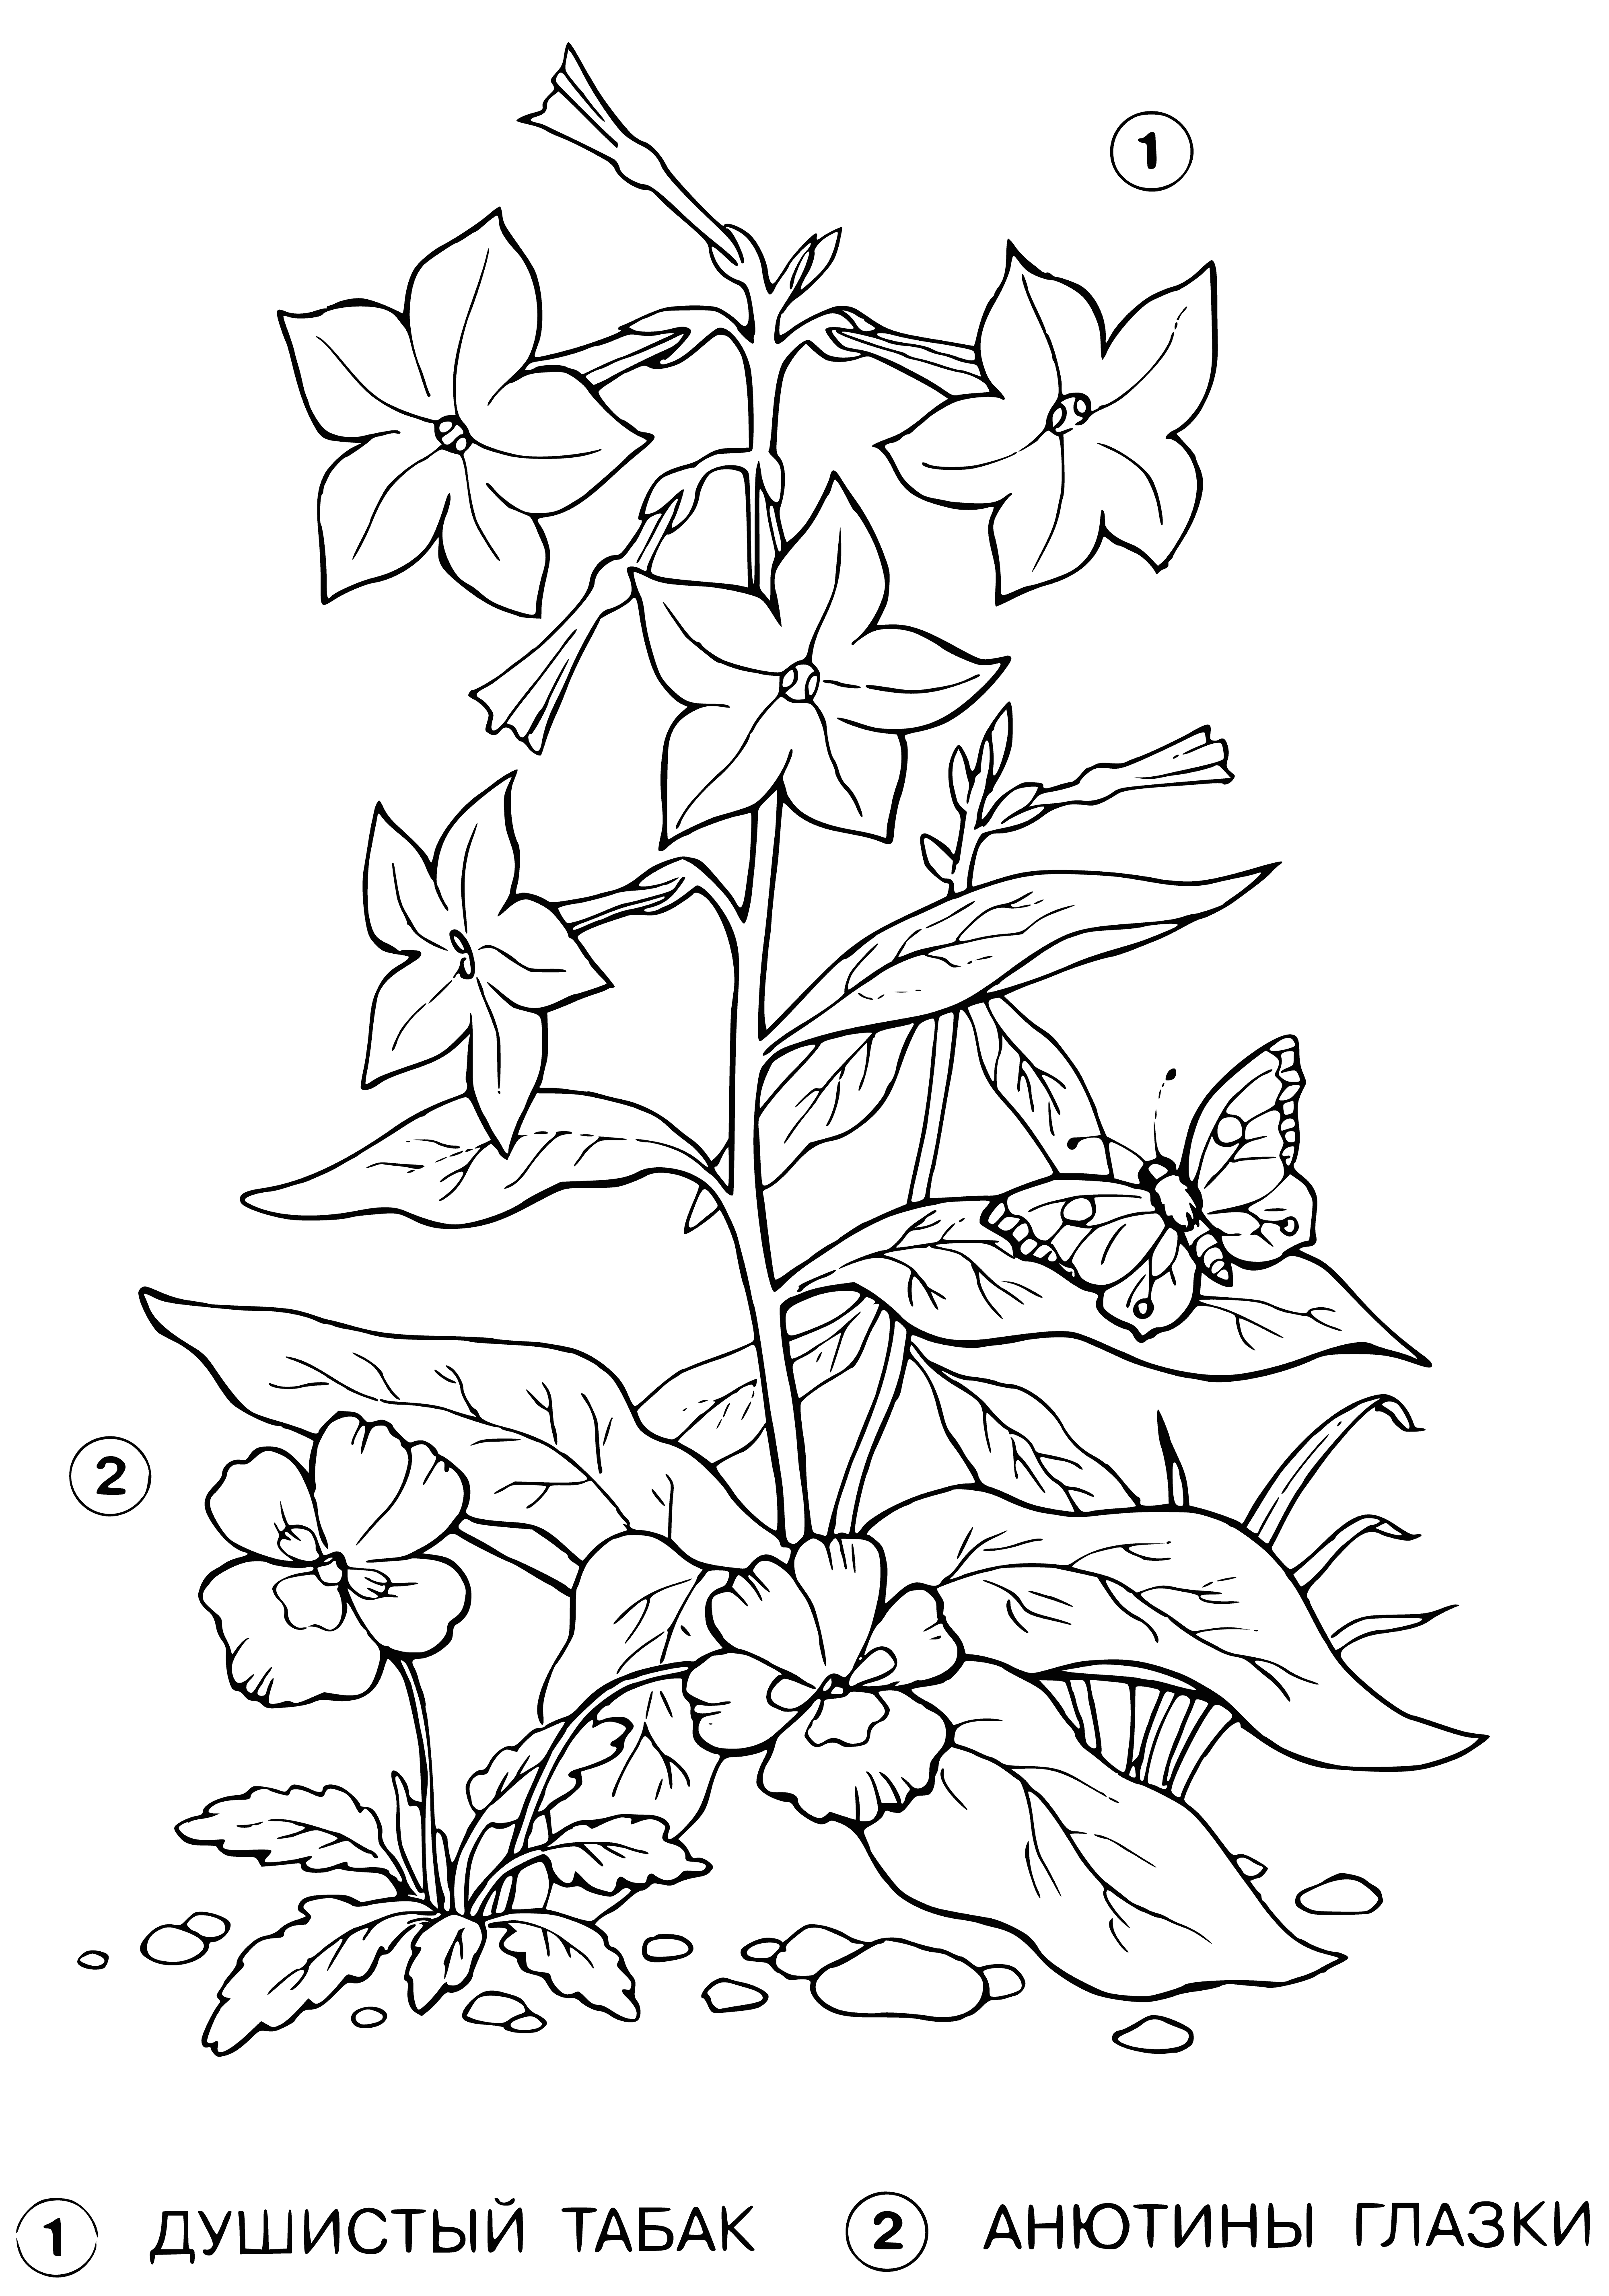 coloring page: Tobacco & pansies make a striking combo: tobacco tall & slender, pansies small & colorful.